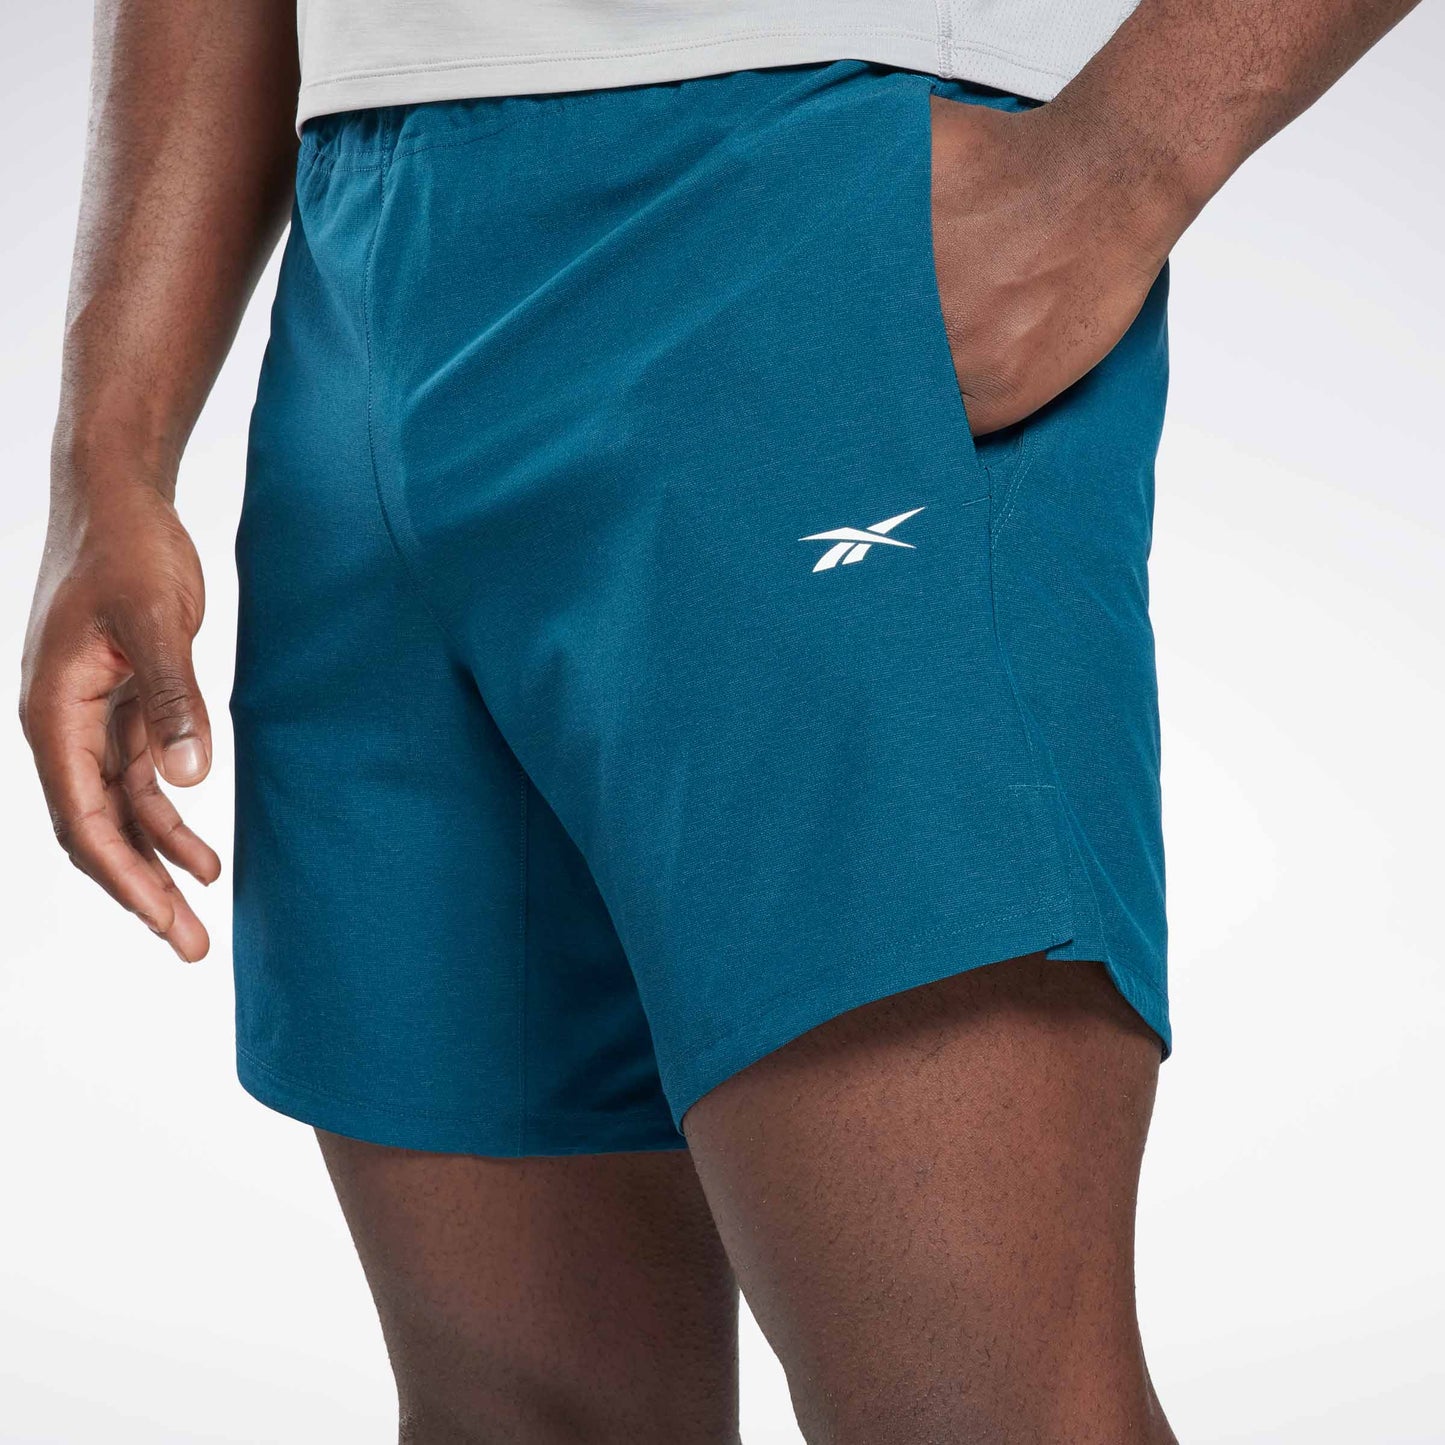 Strength Shorts 2.0 Forest Green